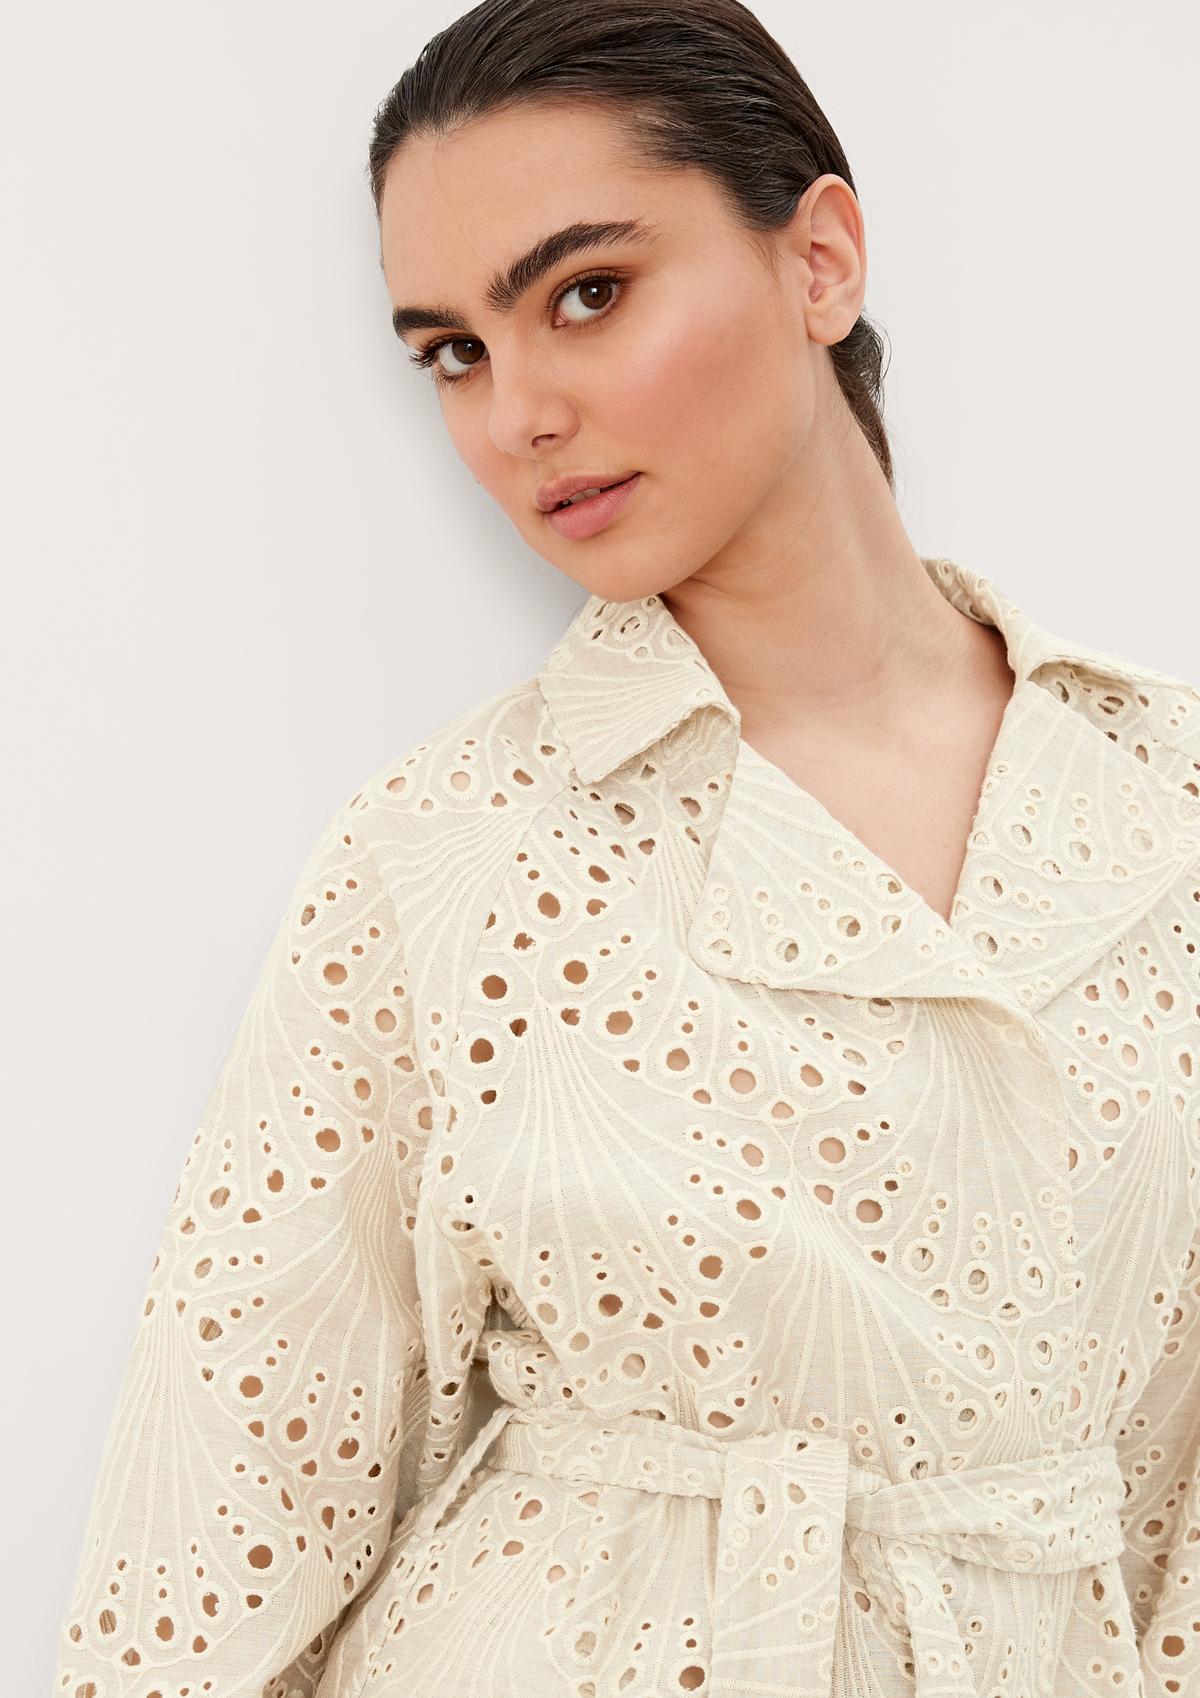 s.Oliver Jacket made of undyed lace